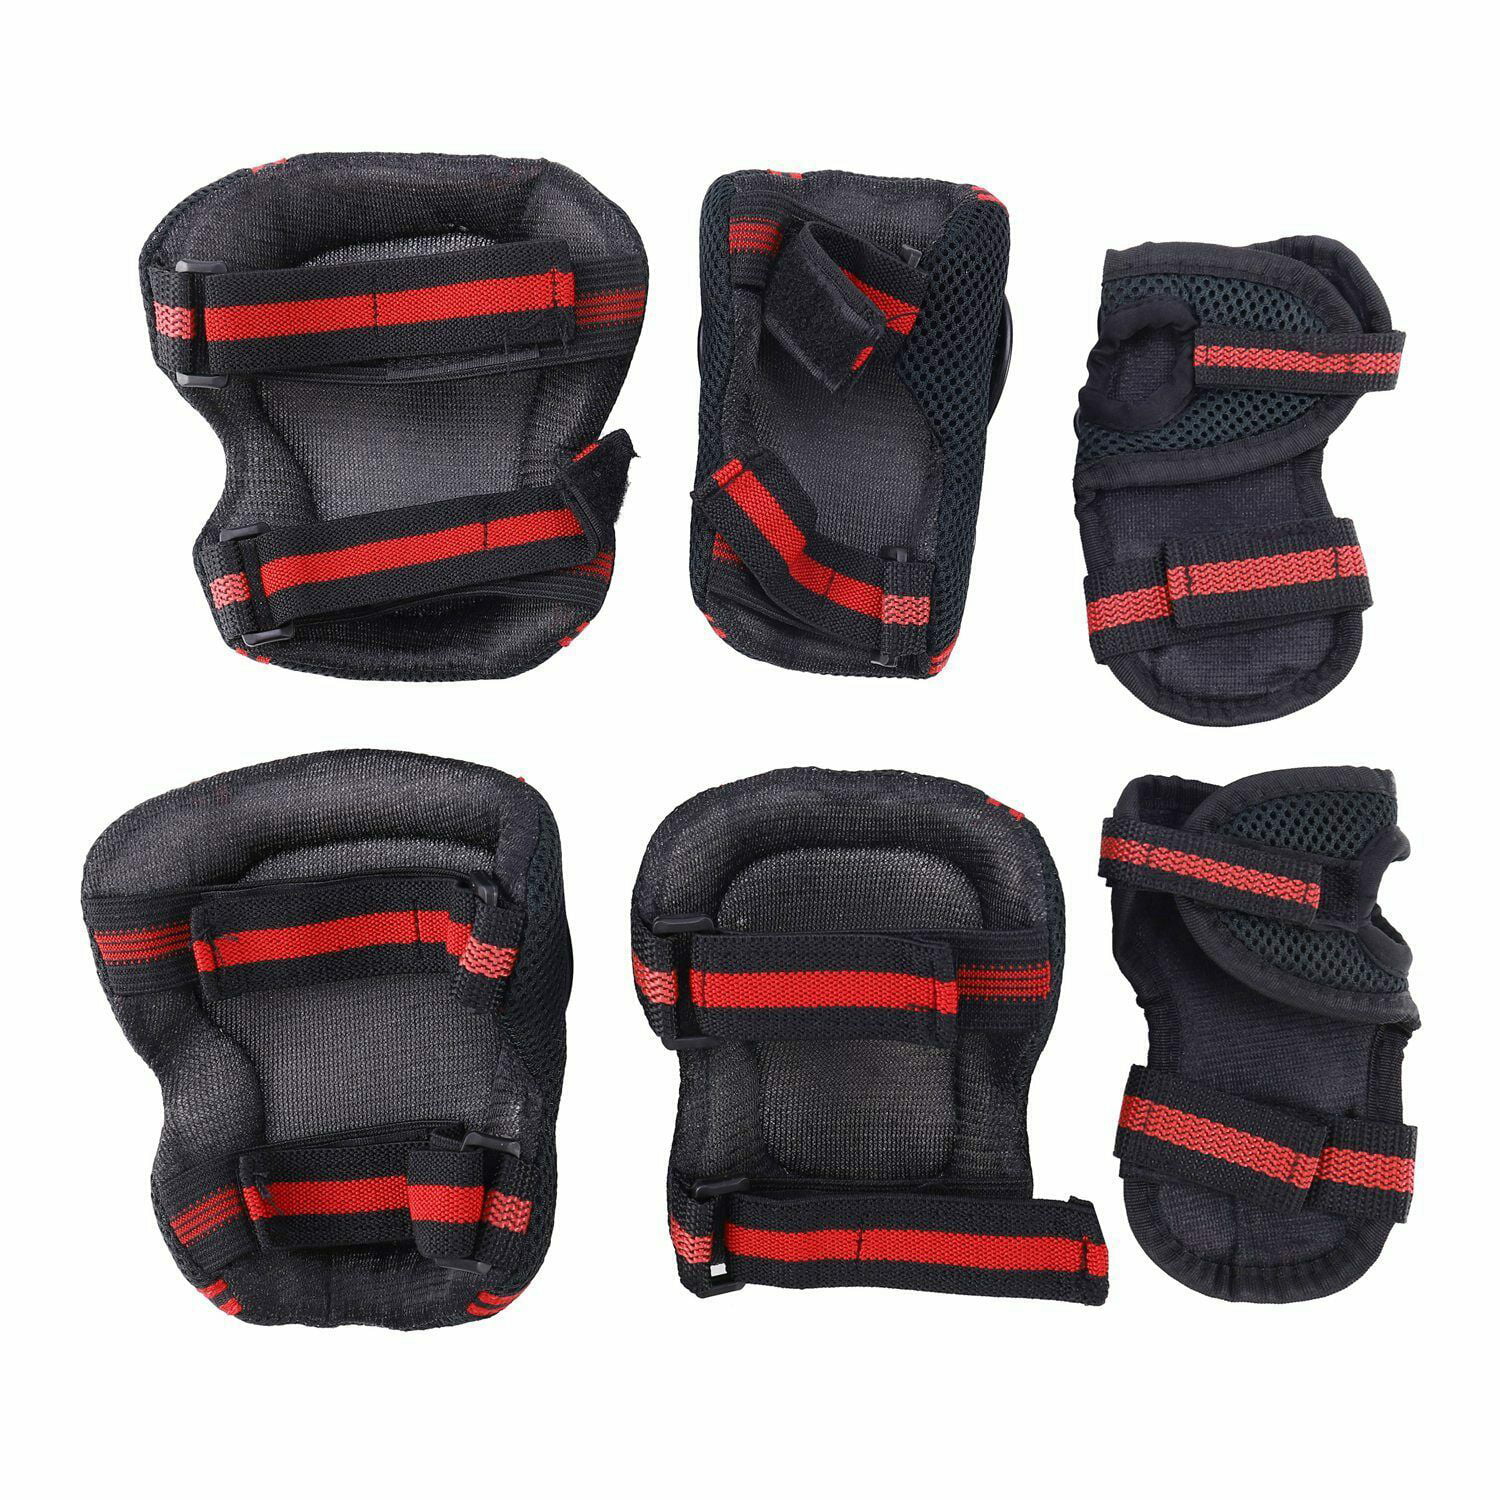 6x Elbow Wrist Knee Pads Sport Safety Protective Gear Guard for Kids Adult Skate 